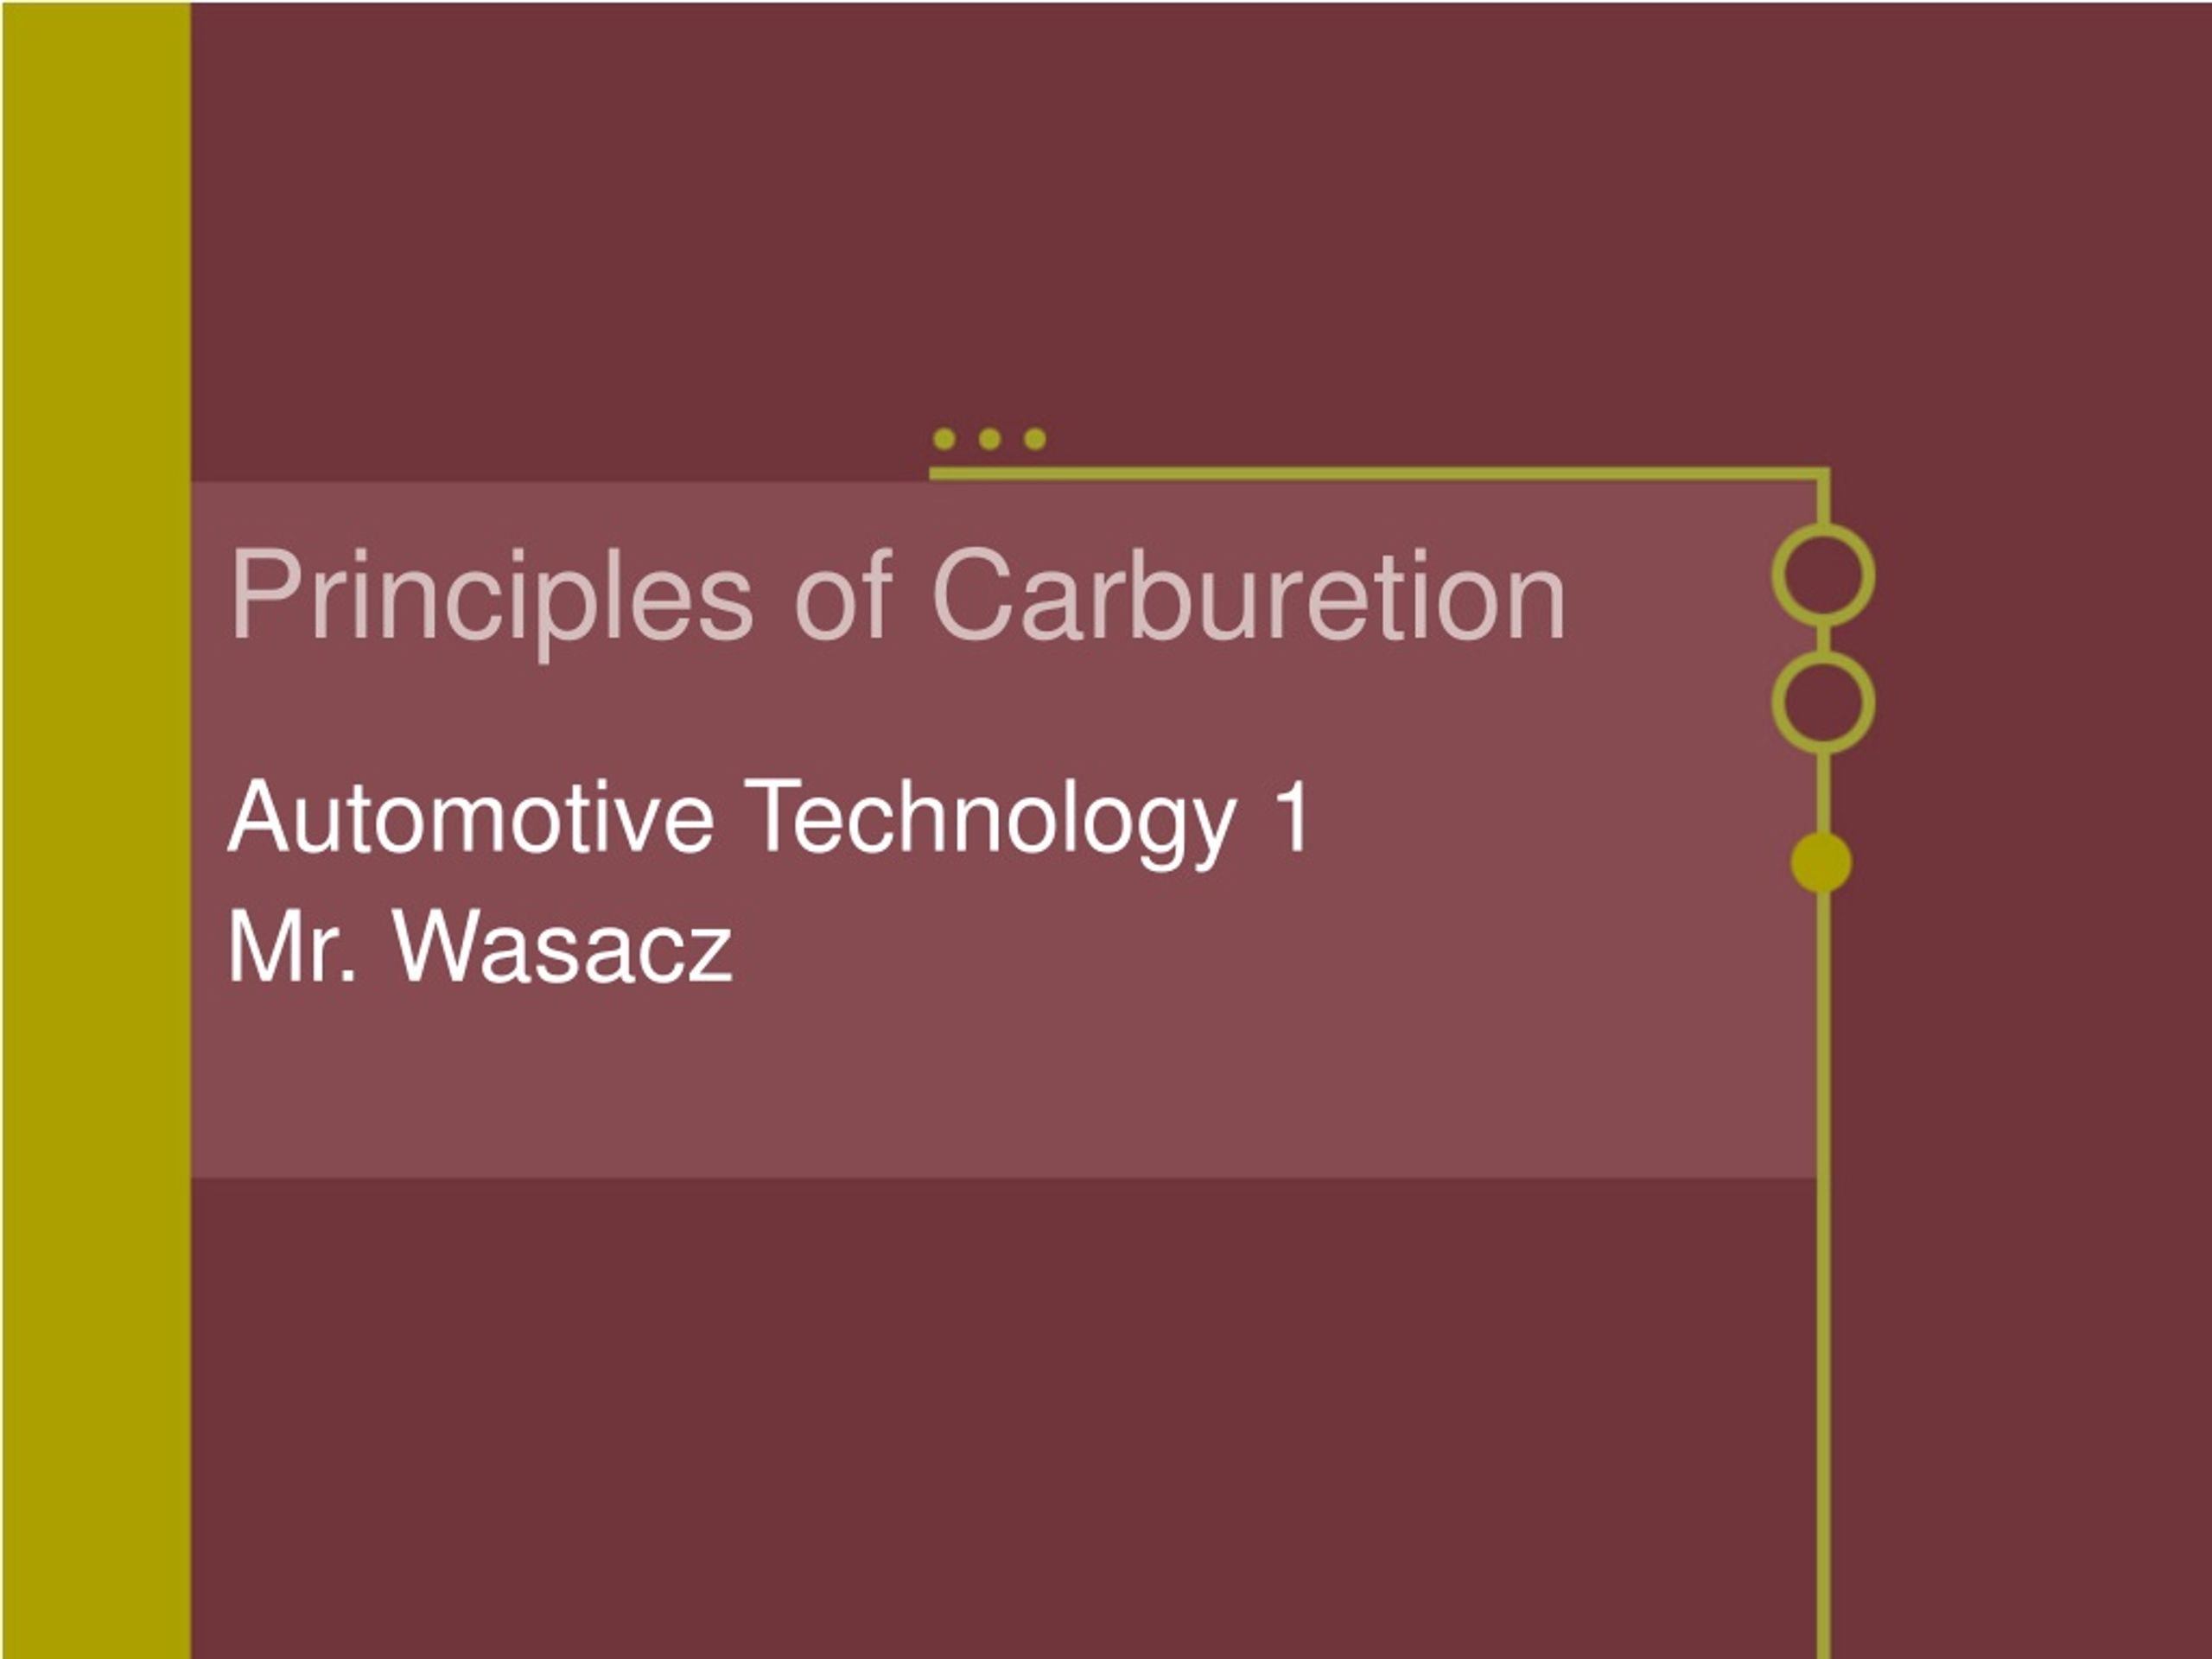 PPT Principles of Carburetion PowerPoint Presentation, free download